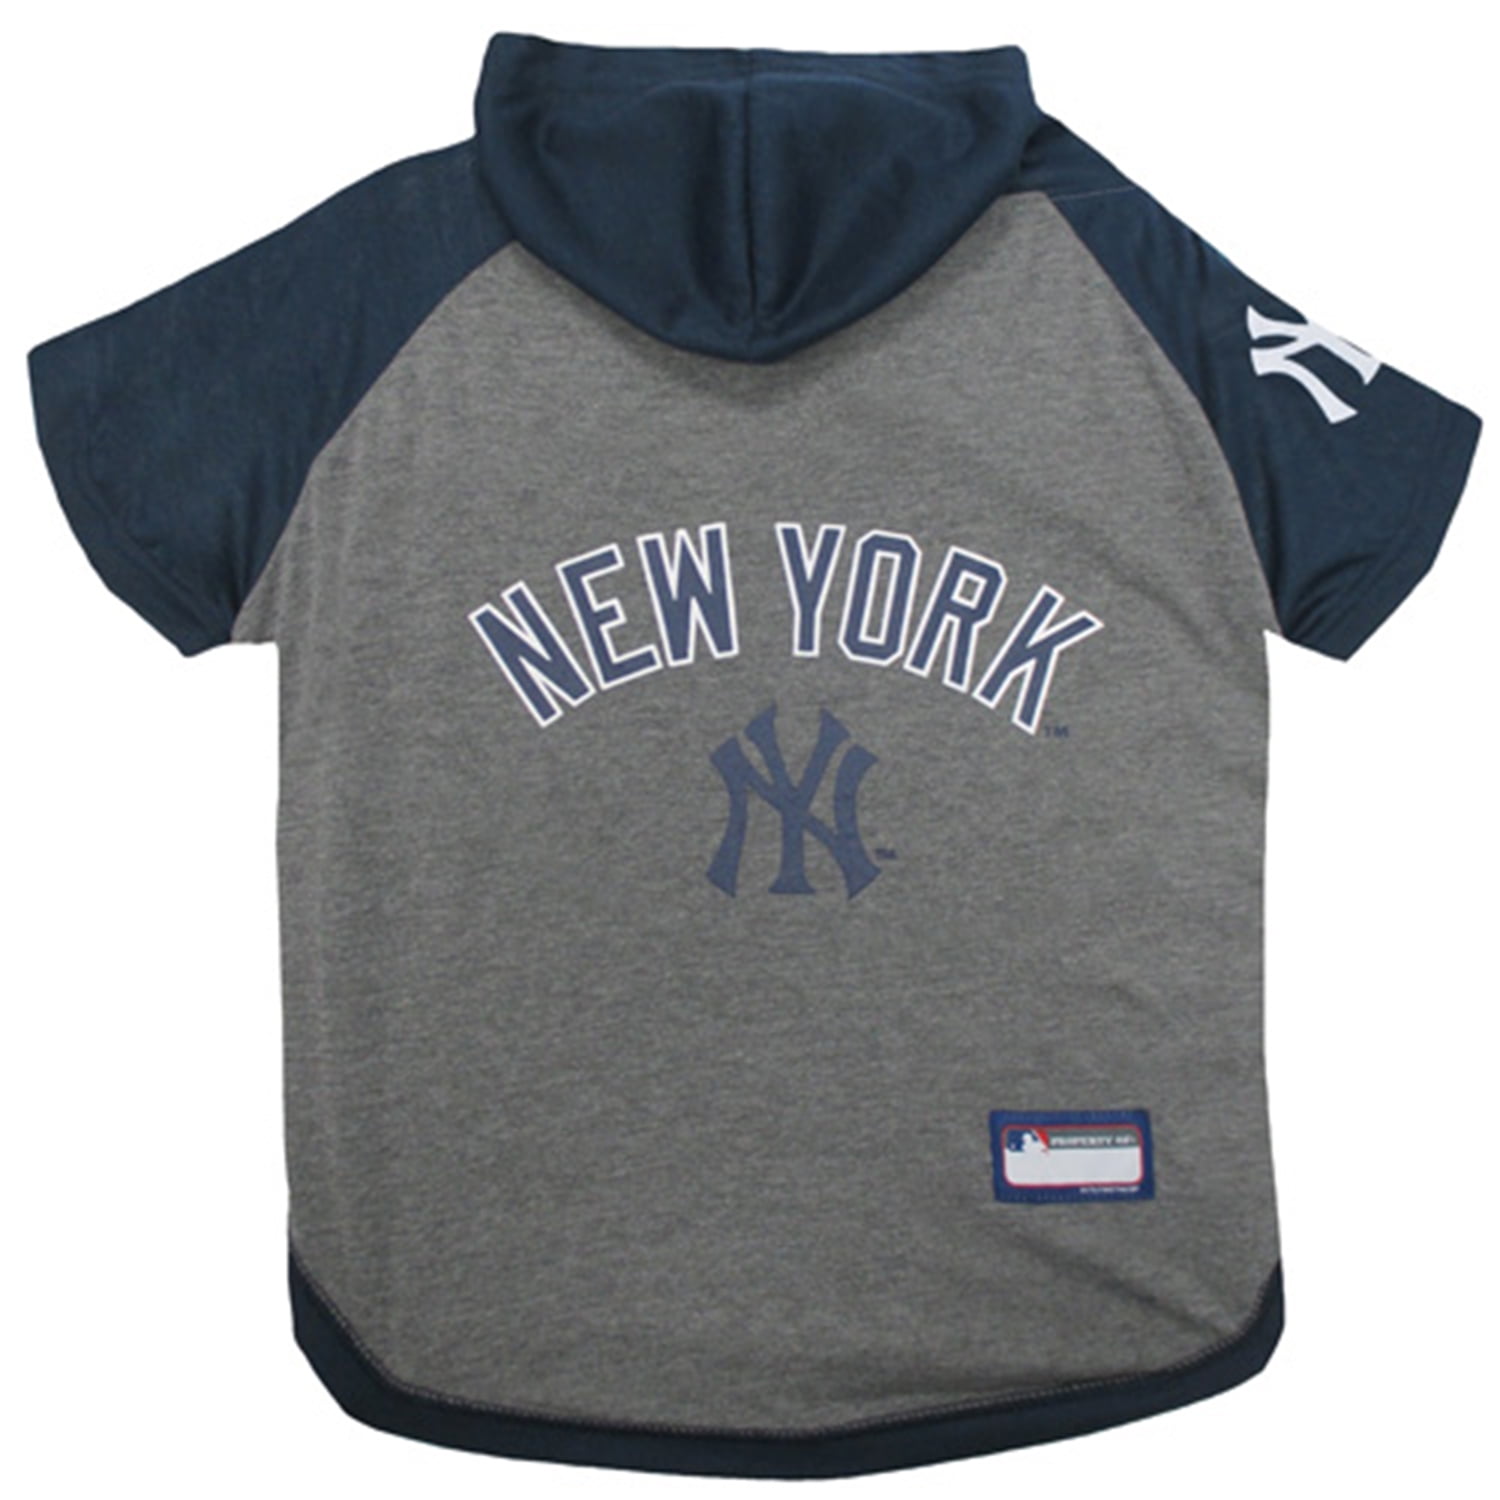 Pets First MLB New York Yankees Hoodie Tee Shirt for Dogs and Cats